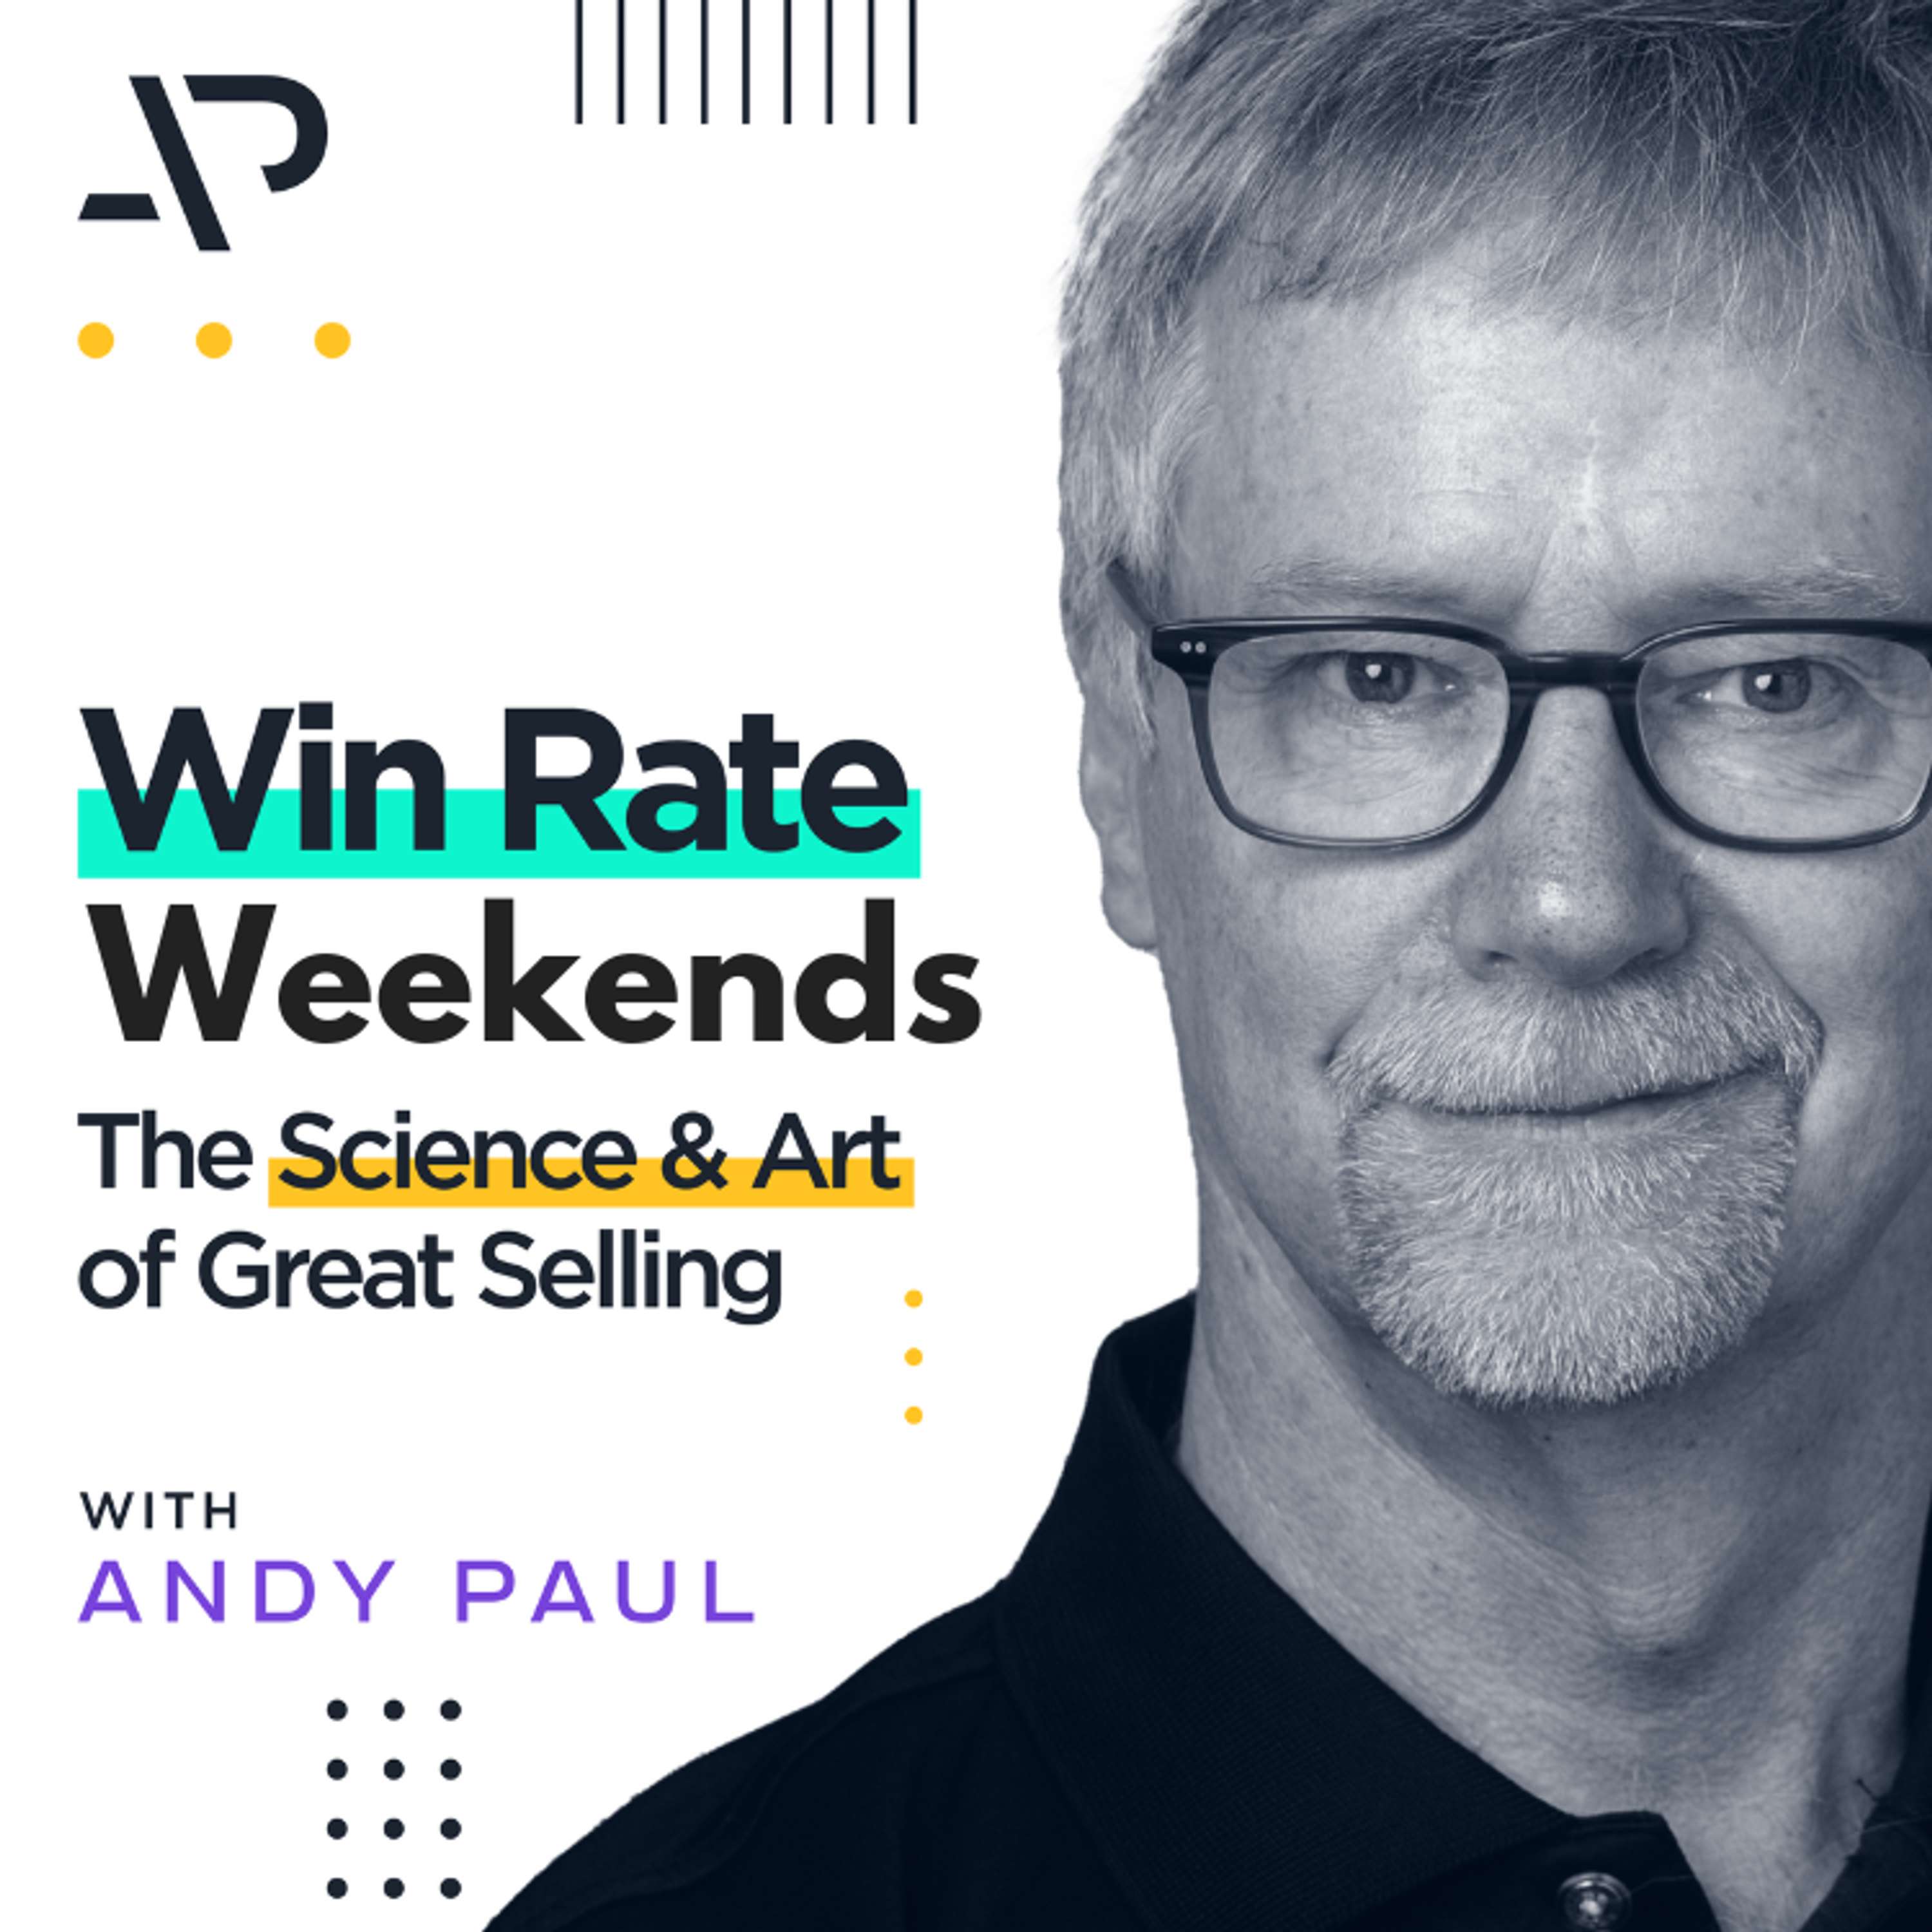 Win Rate Weekends: Can We Apply an Apprentice Model to Selling?